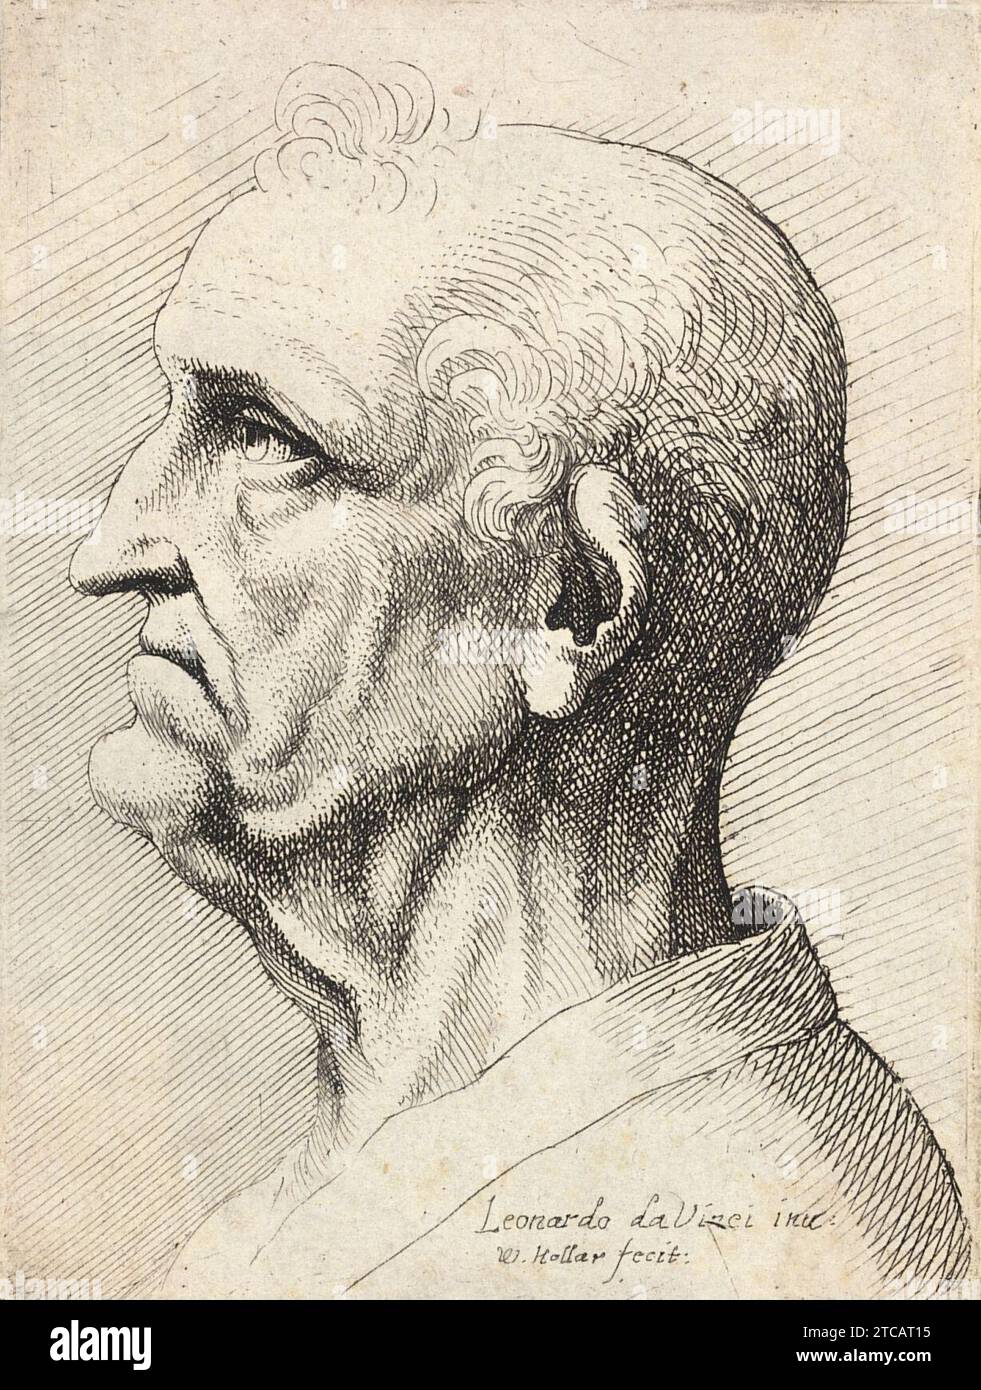 Wenceslas Hollar - Old man with pointed nose and prominent chin. Stock Photo